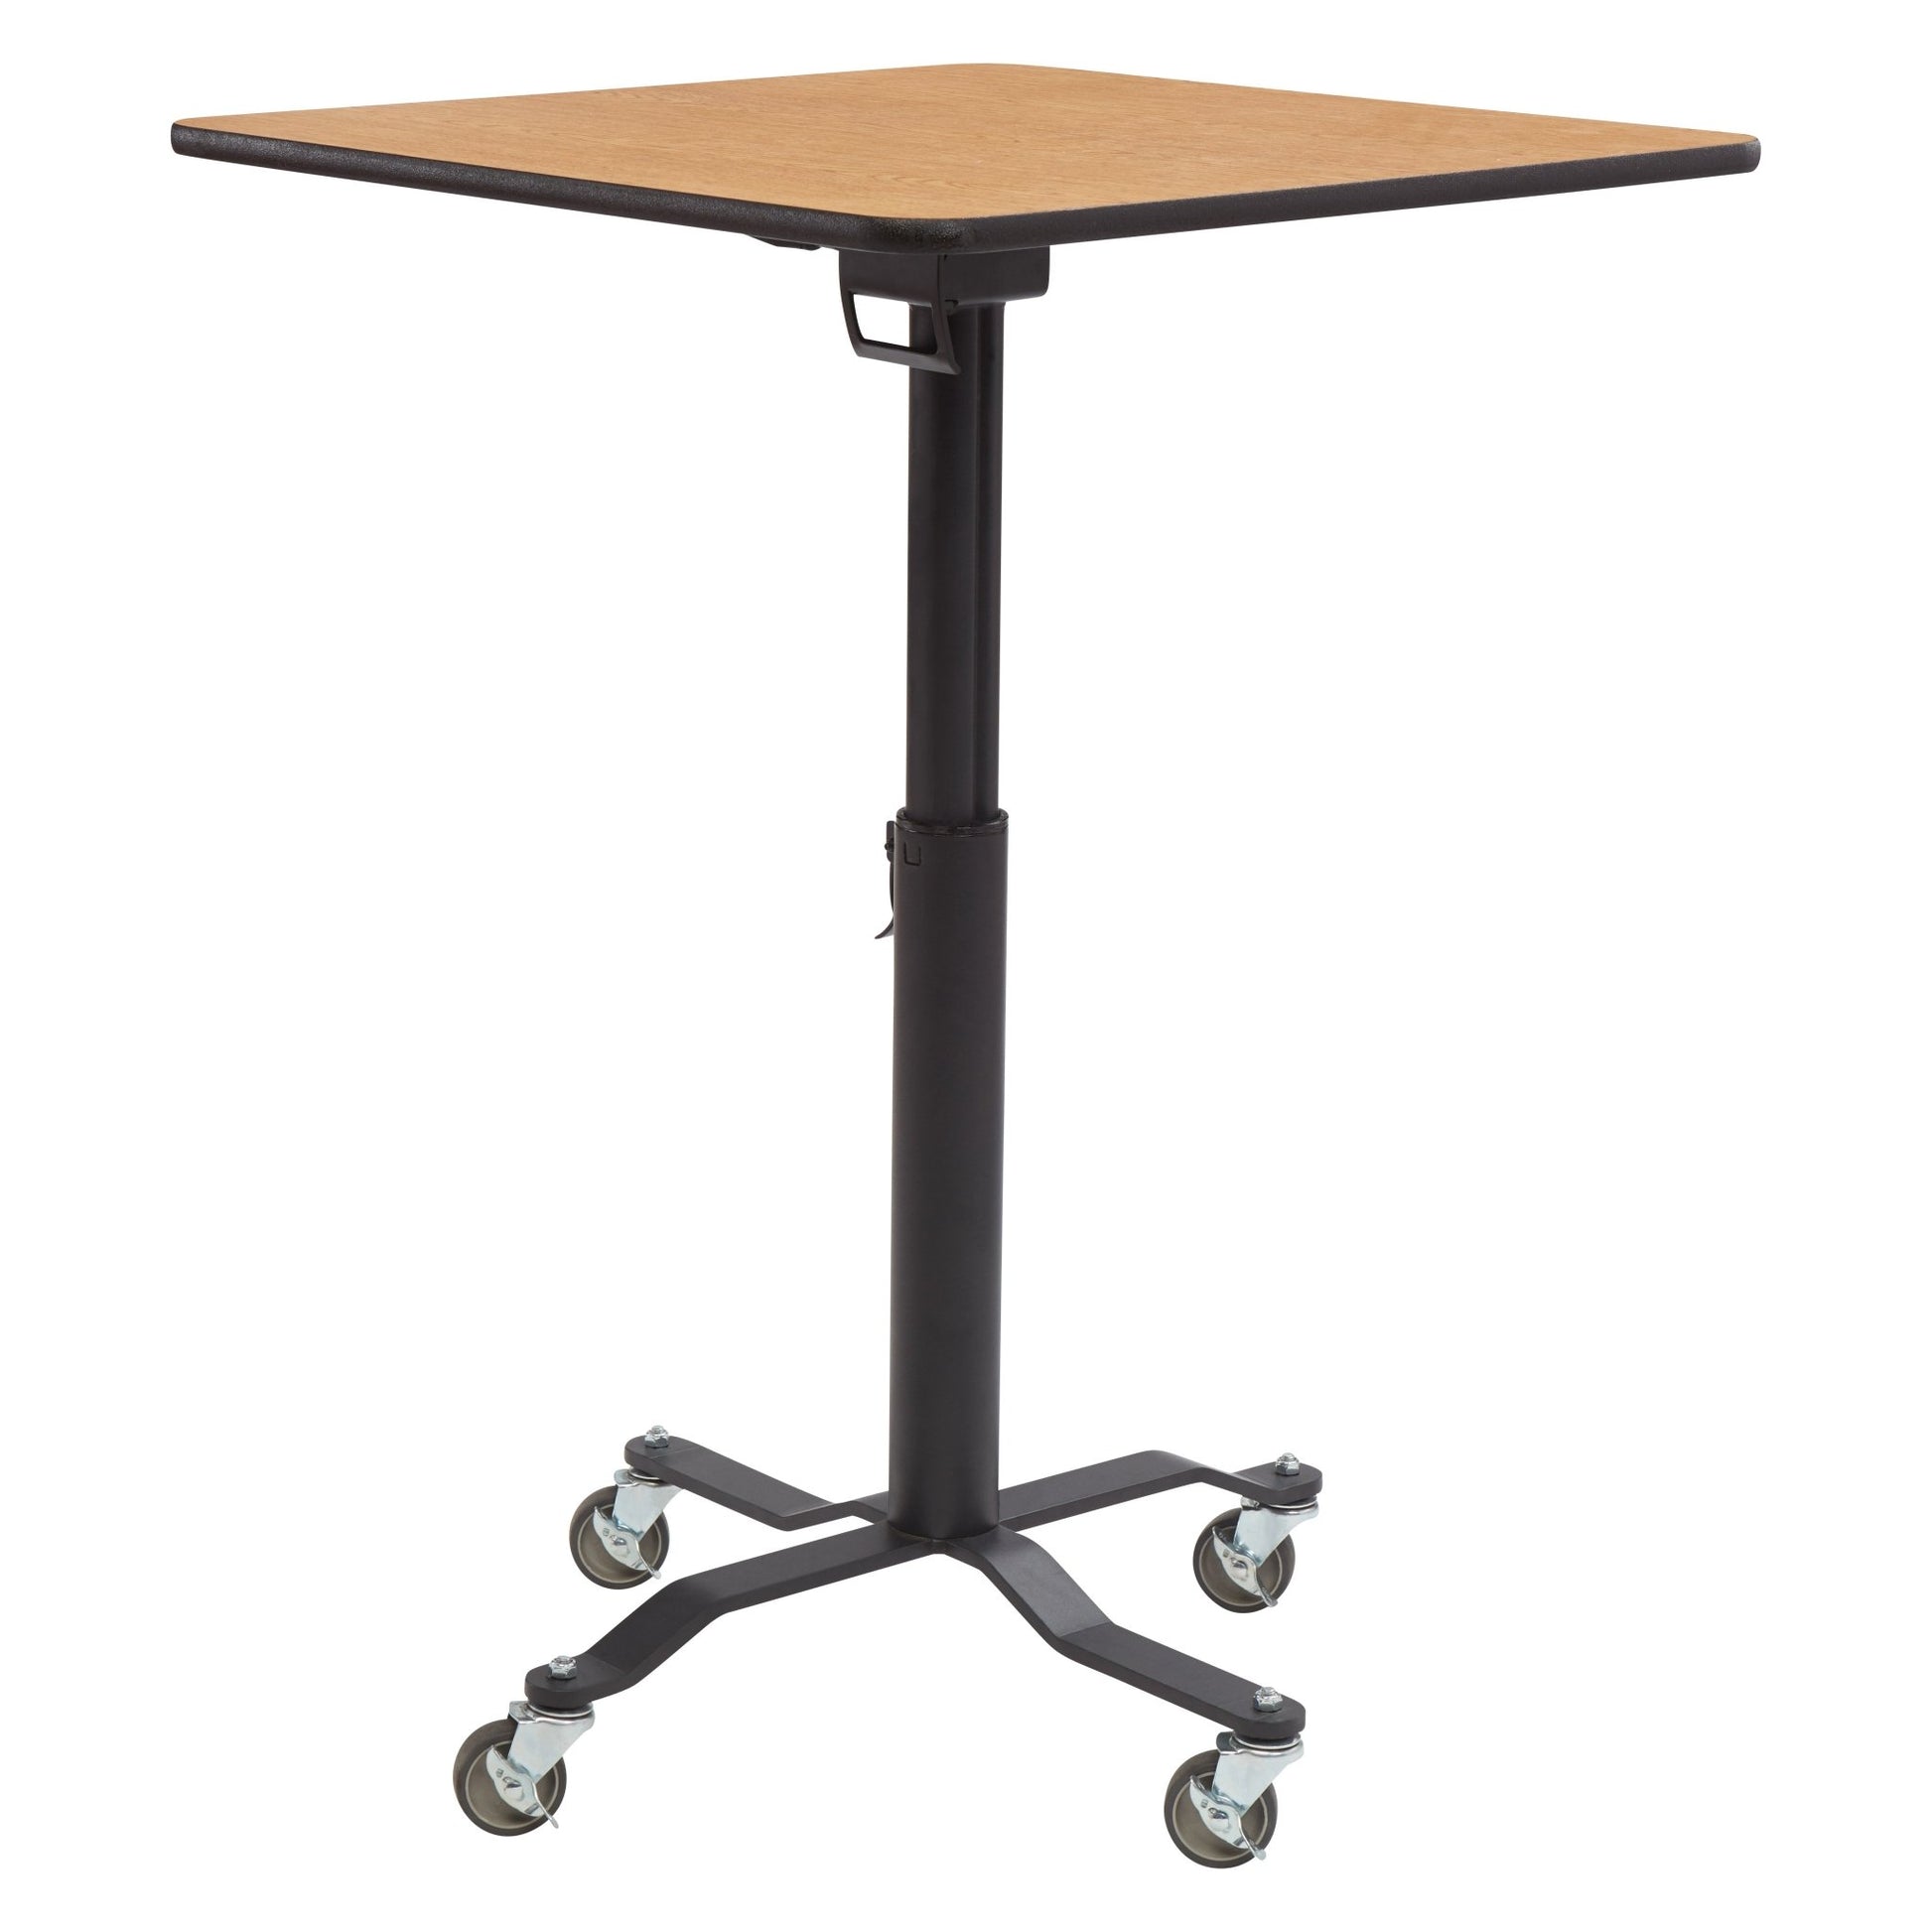 NPS Cafe Time II Table, 24" Square, High Pressure Laminate Top, ParticleBoard, Vinyl T-Molding (NationalPublic Seating NPS-PCT324PBTM) - SchoolOutlet